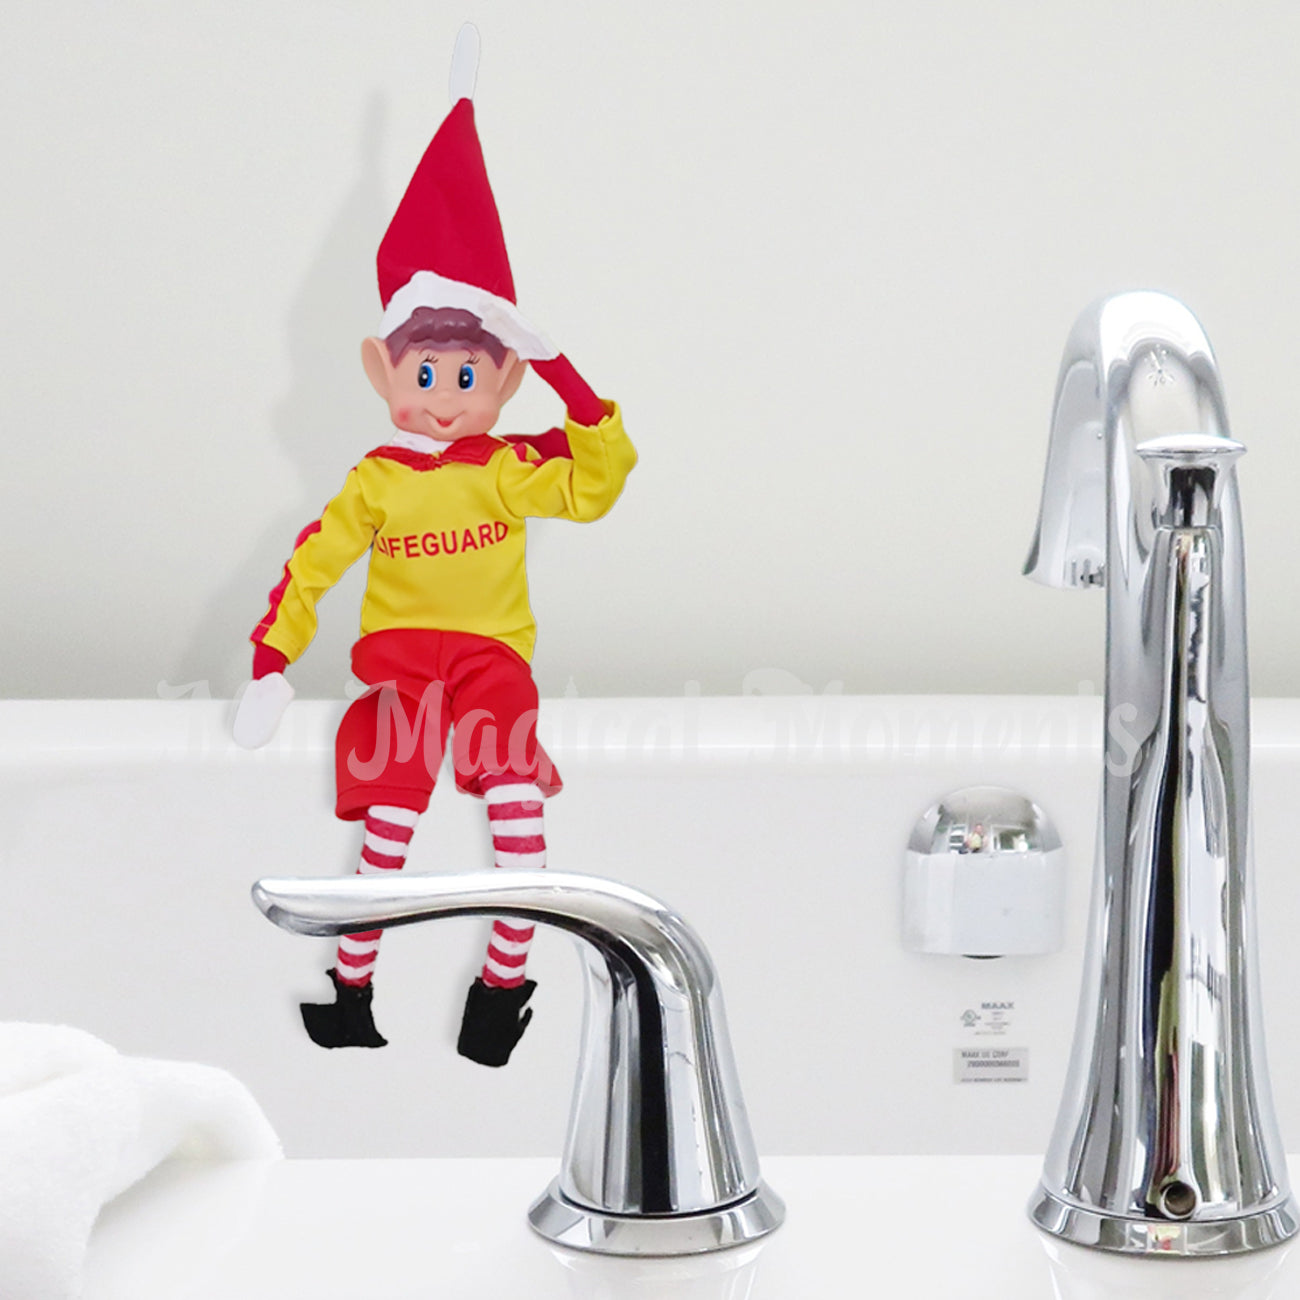 elves behavin badly wearing a lifesaver outfit watching in the bathtub